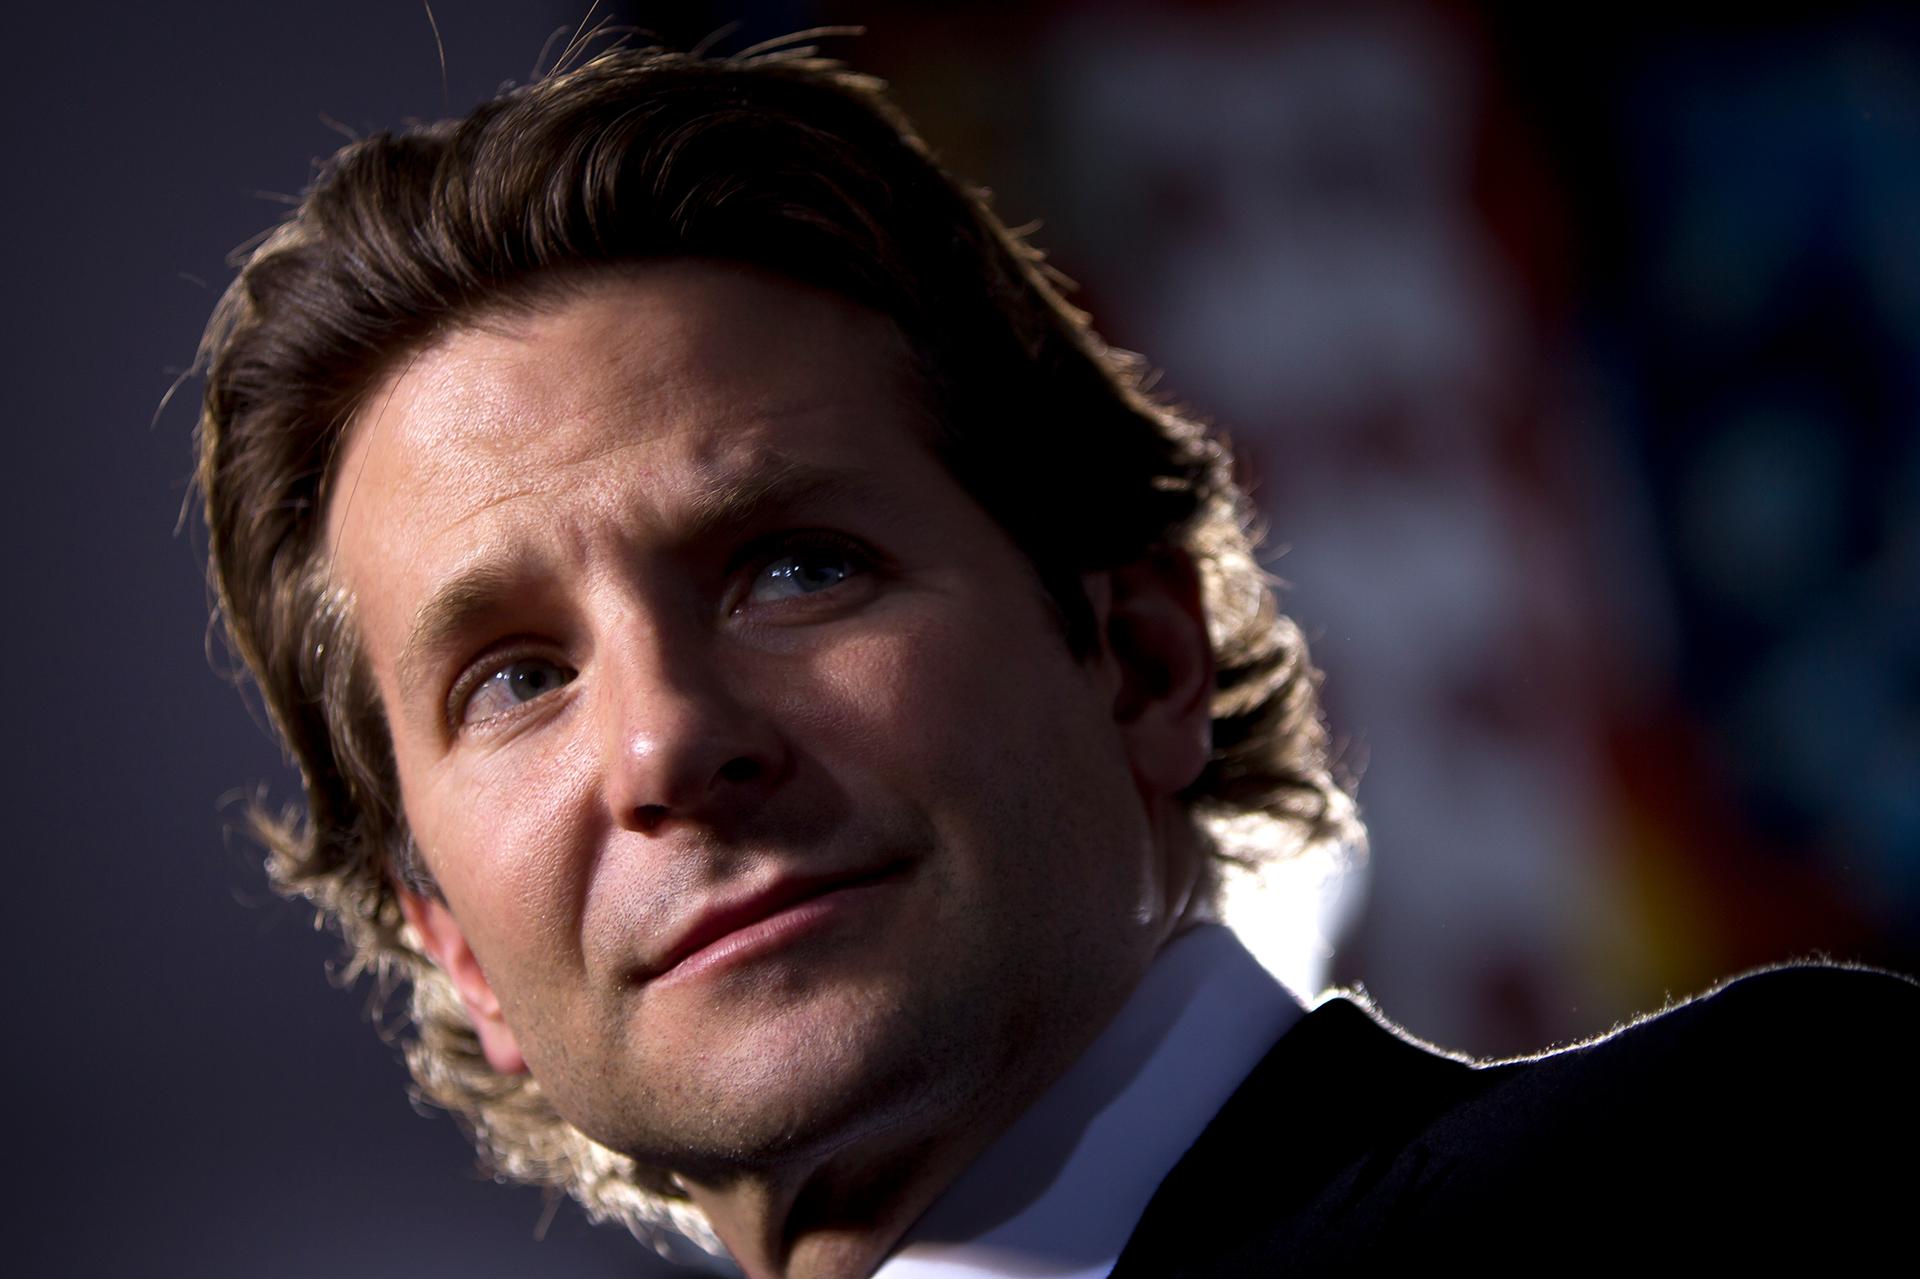 Actor Bradley Cooper arrives for the premiere of the film "American Sniper" in New York on December 15, 2014. 